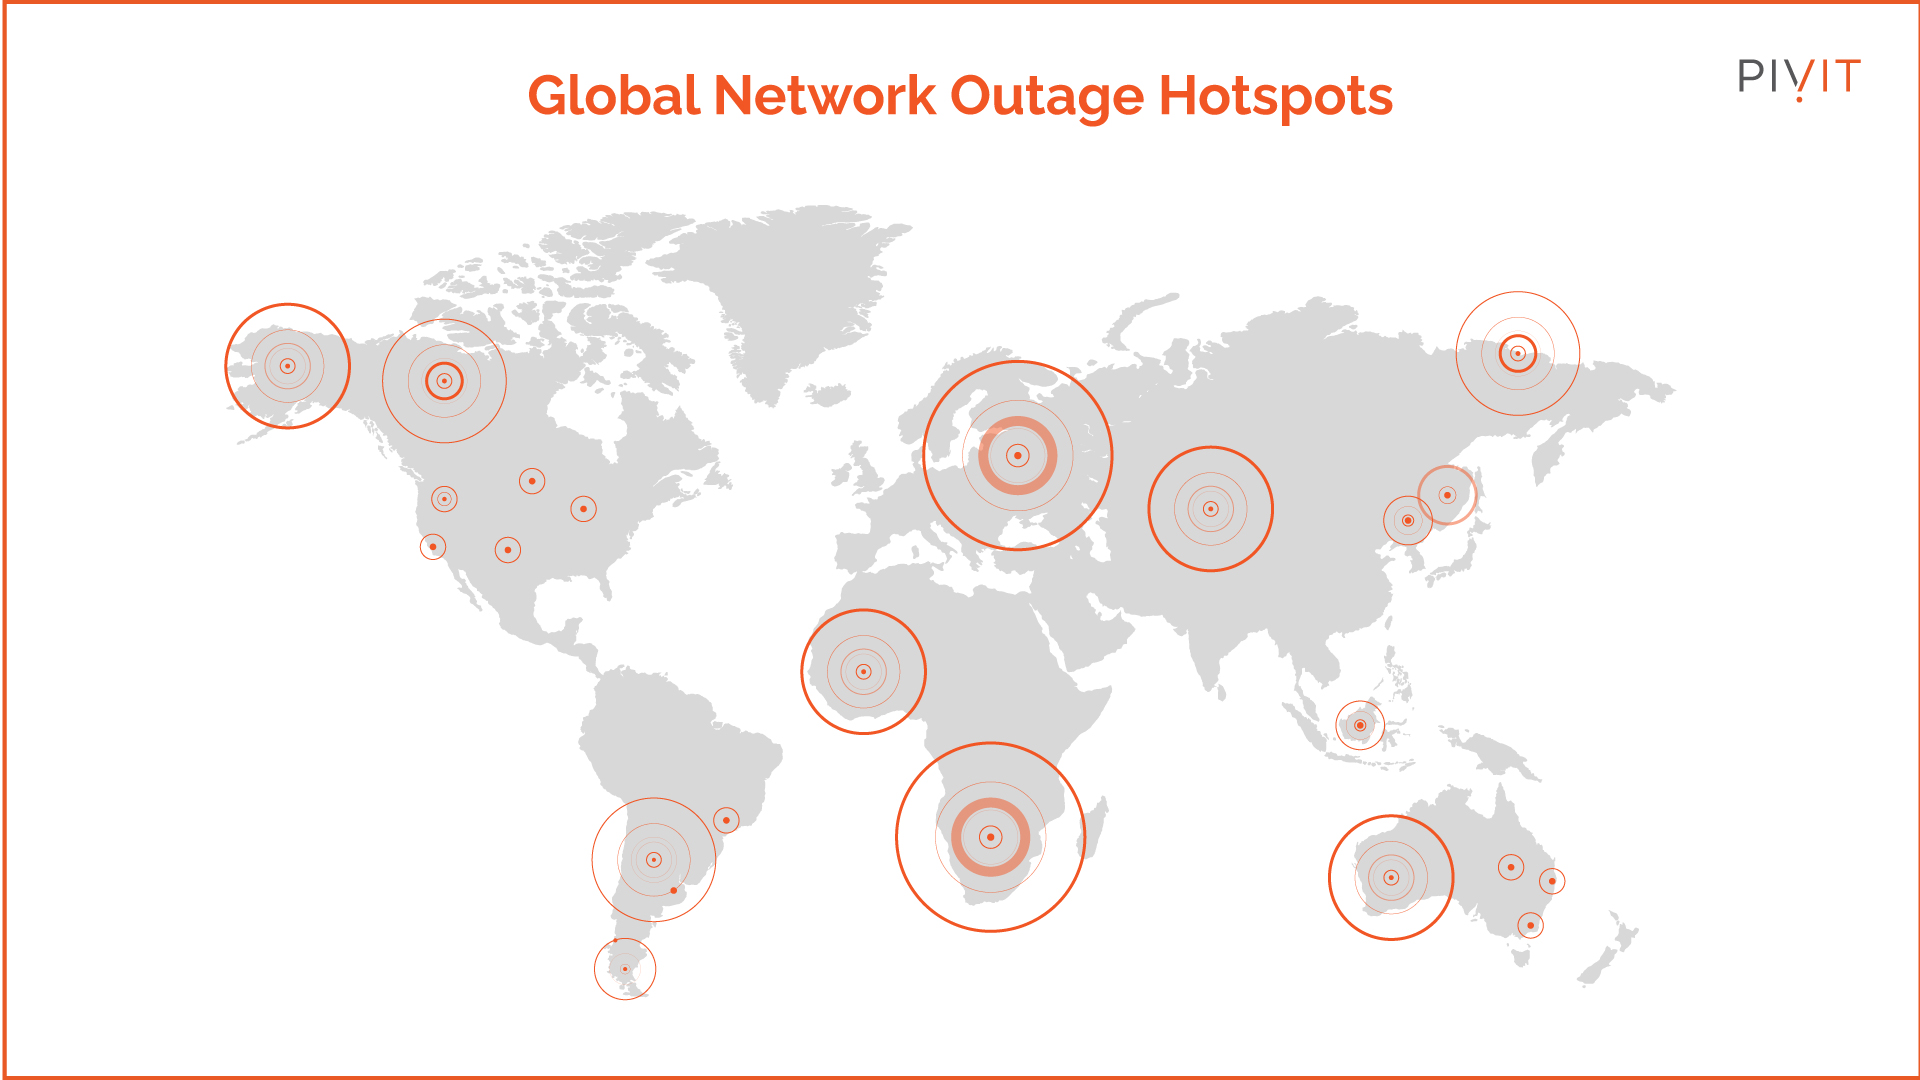 global network outage hotspots from pivit global